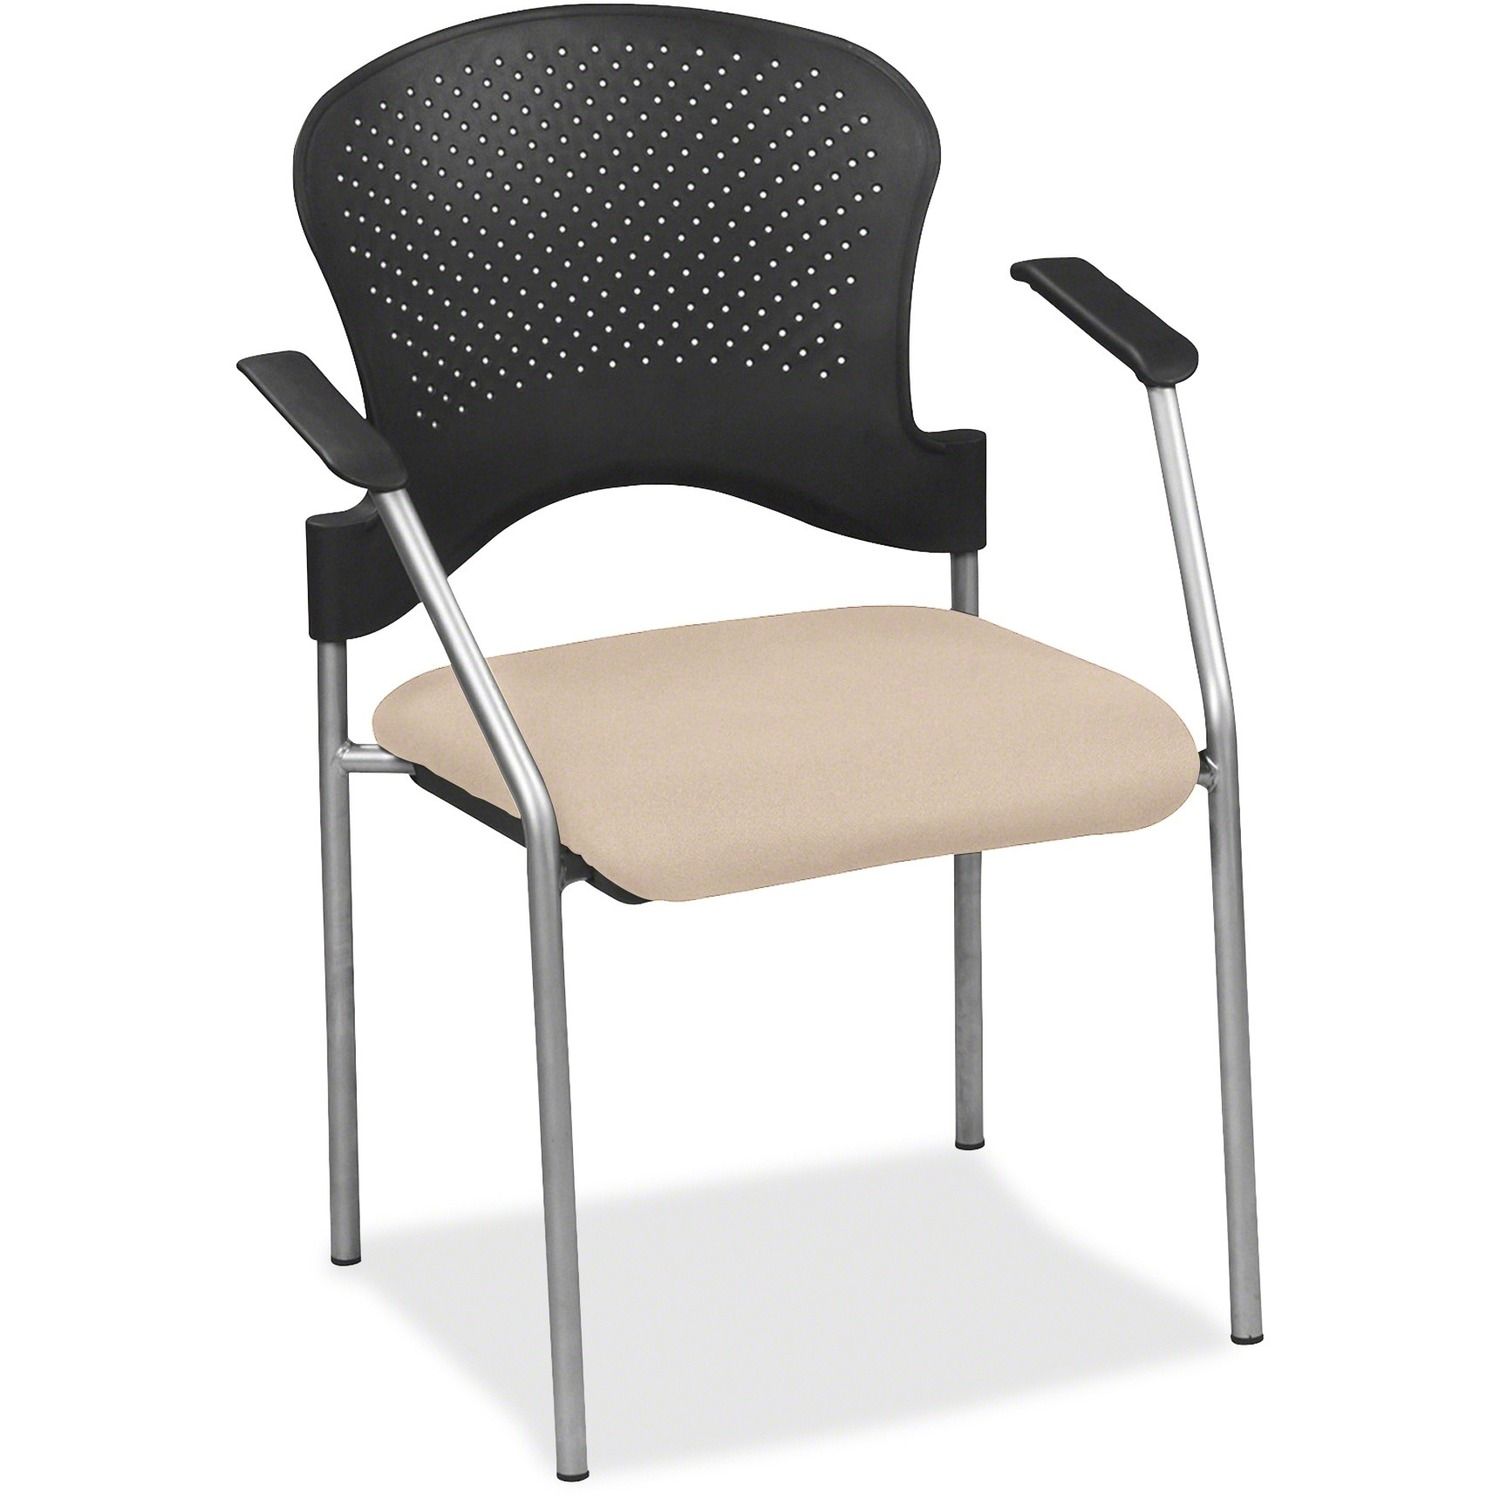 breeze FS8277 Stacking Chair Azure Fabric Seat, Gray Steel Frame, Four-legged Base, 1 Each